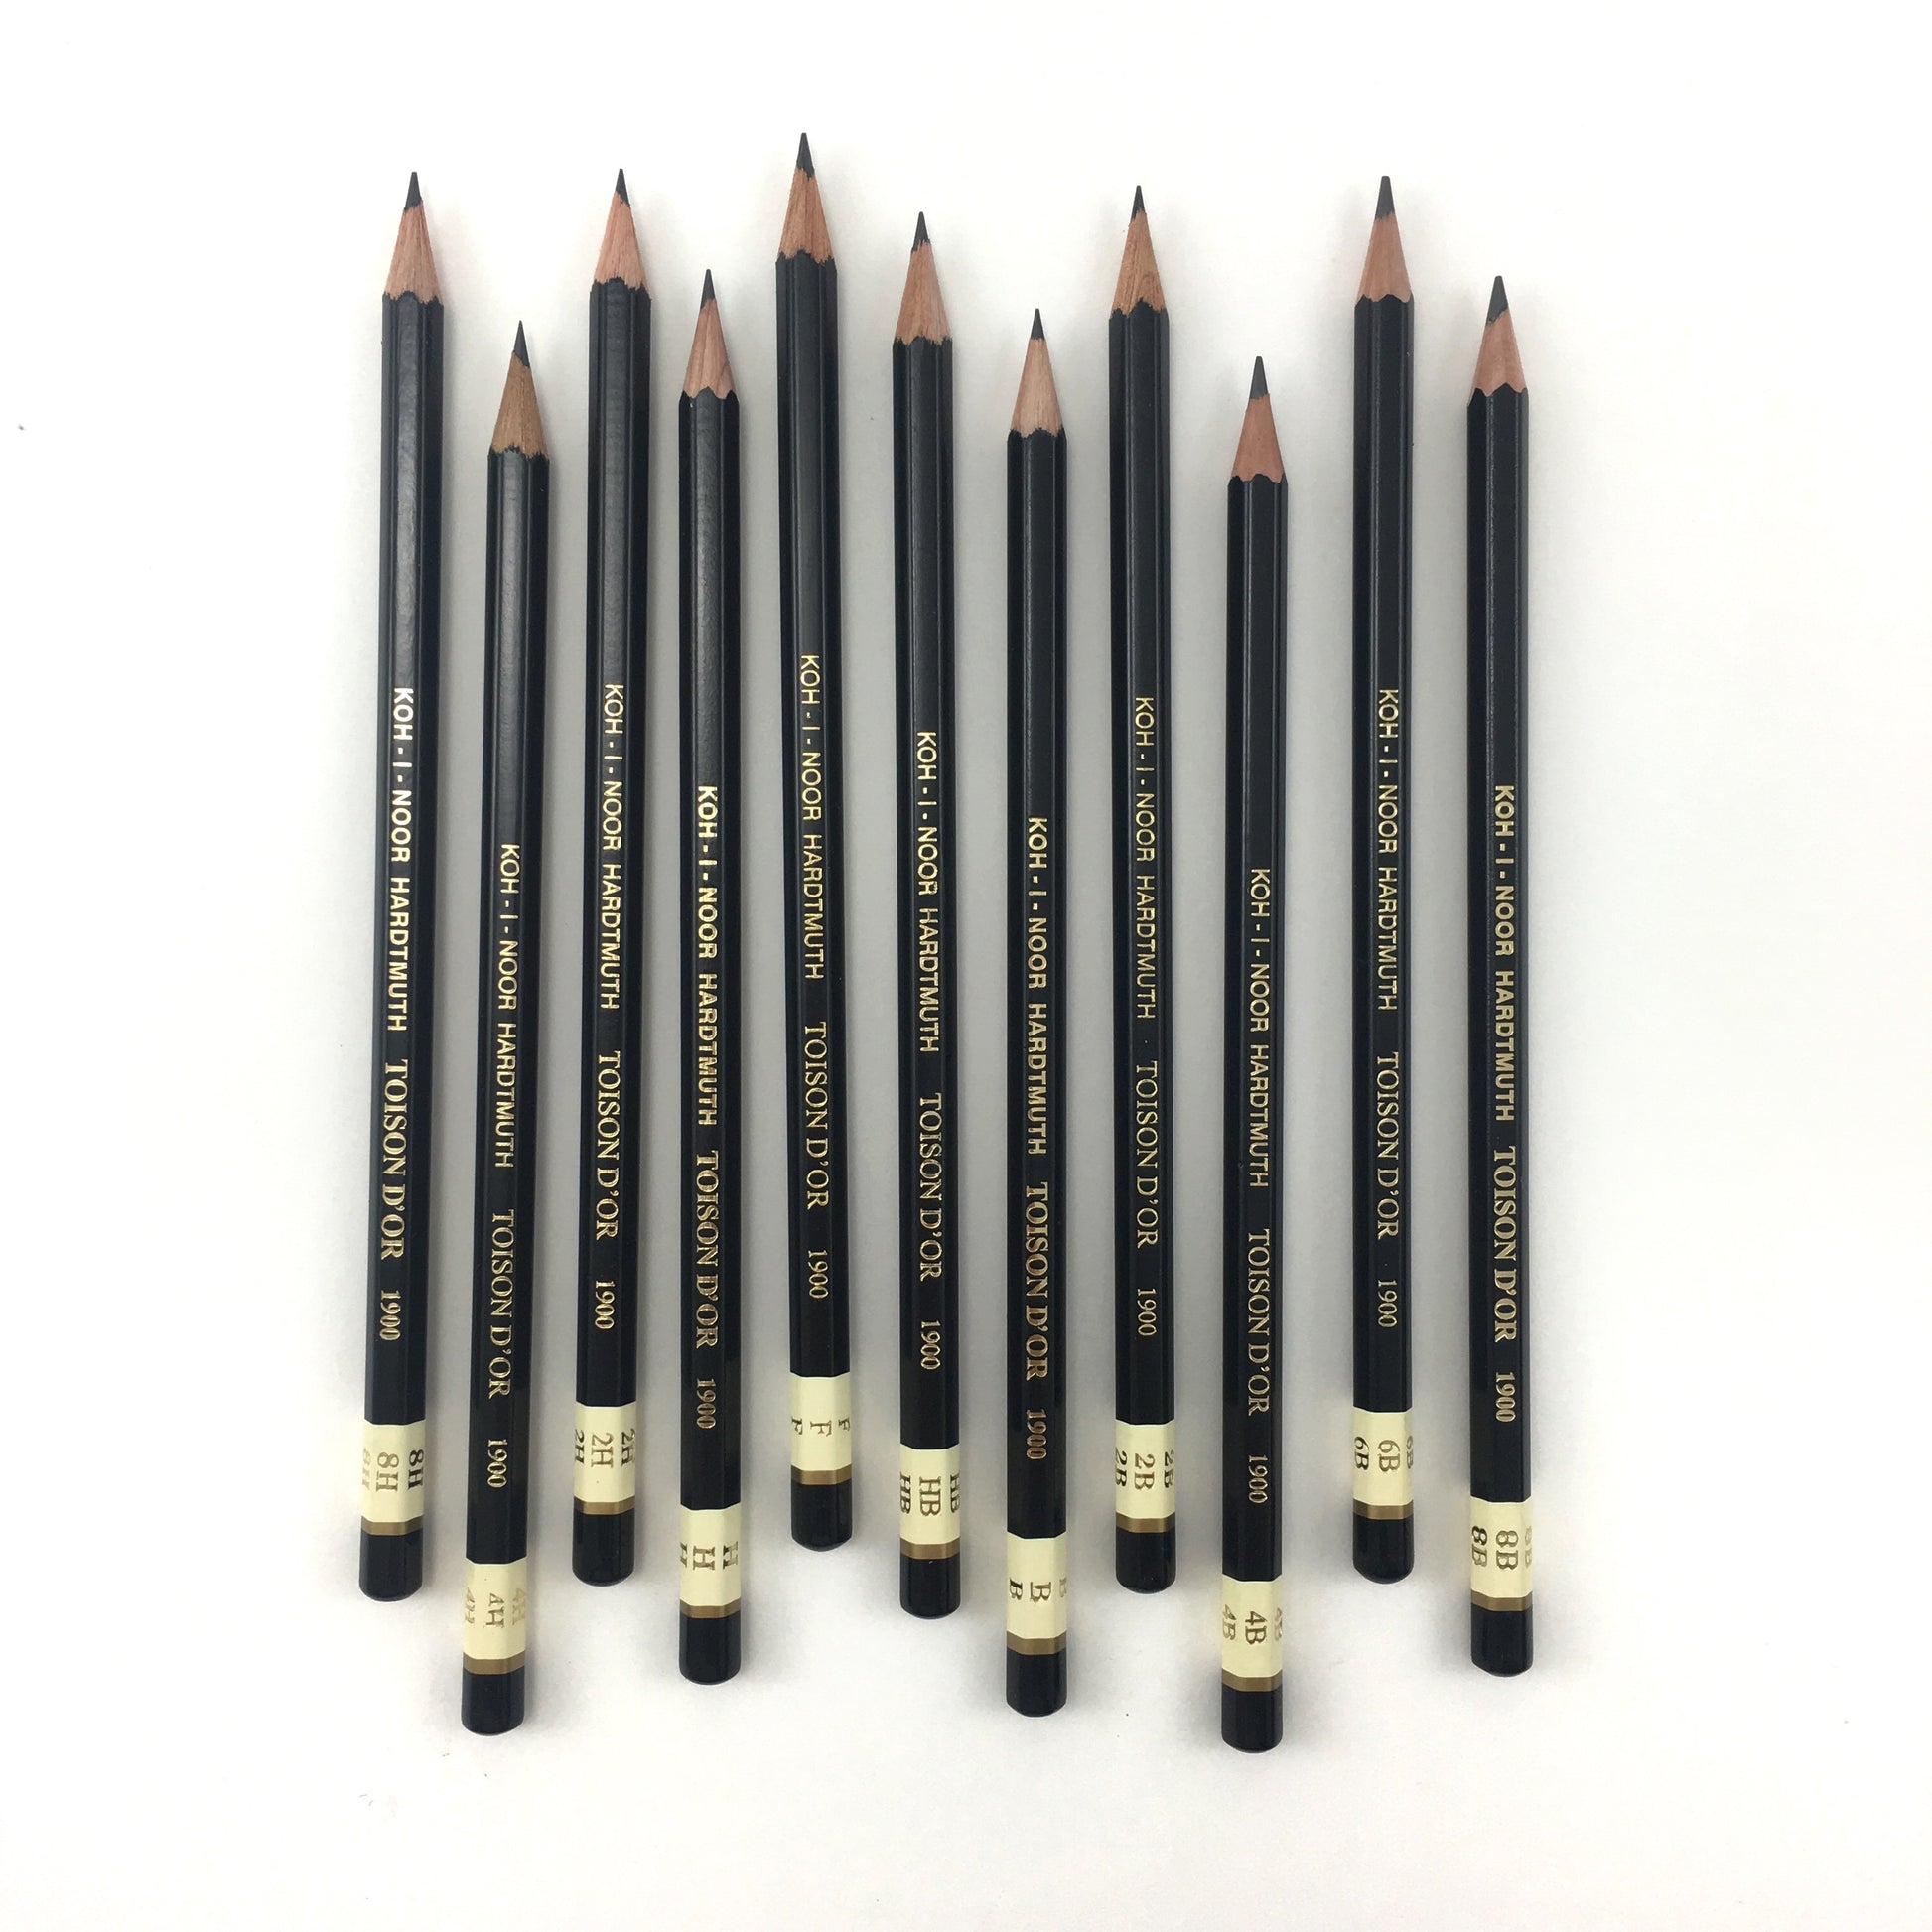 Camlin 6 shade Graphite pencil with 3 pcs Charcoal pencil -  colors